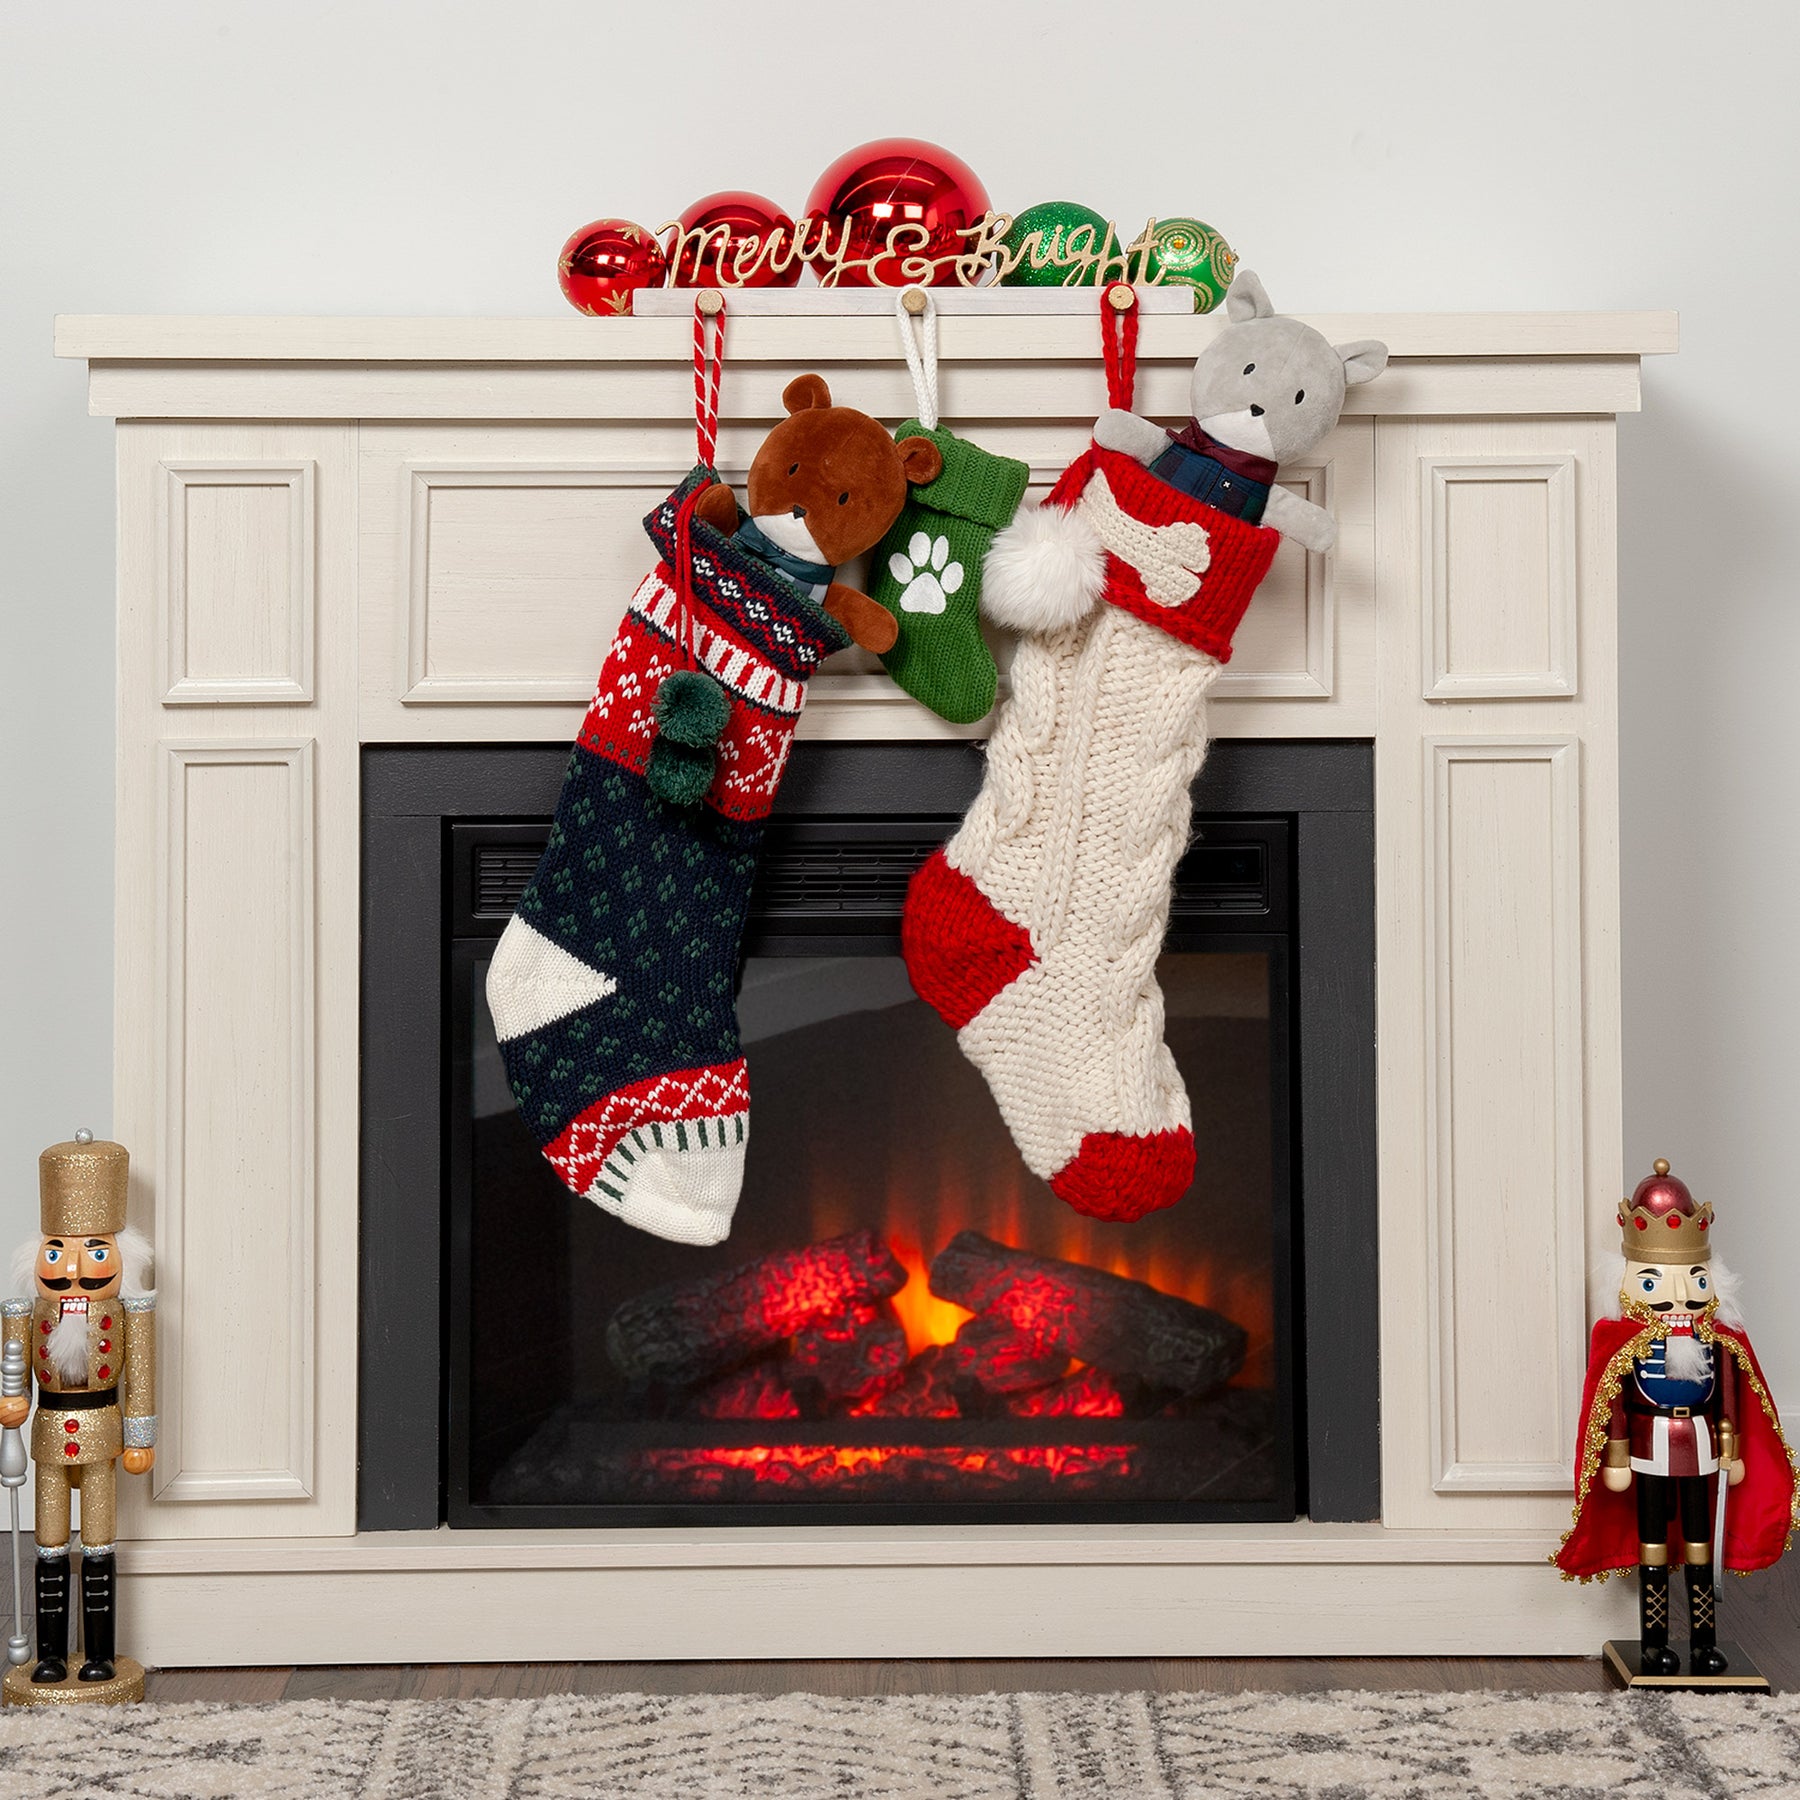 Two Stockings with stuffed animals in them hanging on a mantlepiece during the holiday season at FurHaven Pet Products